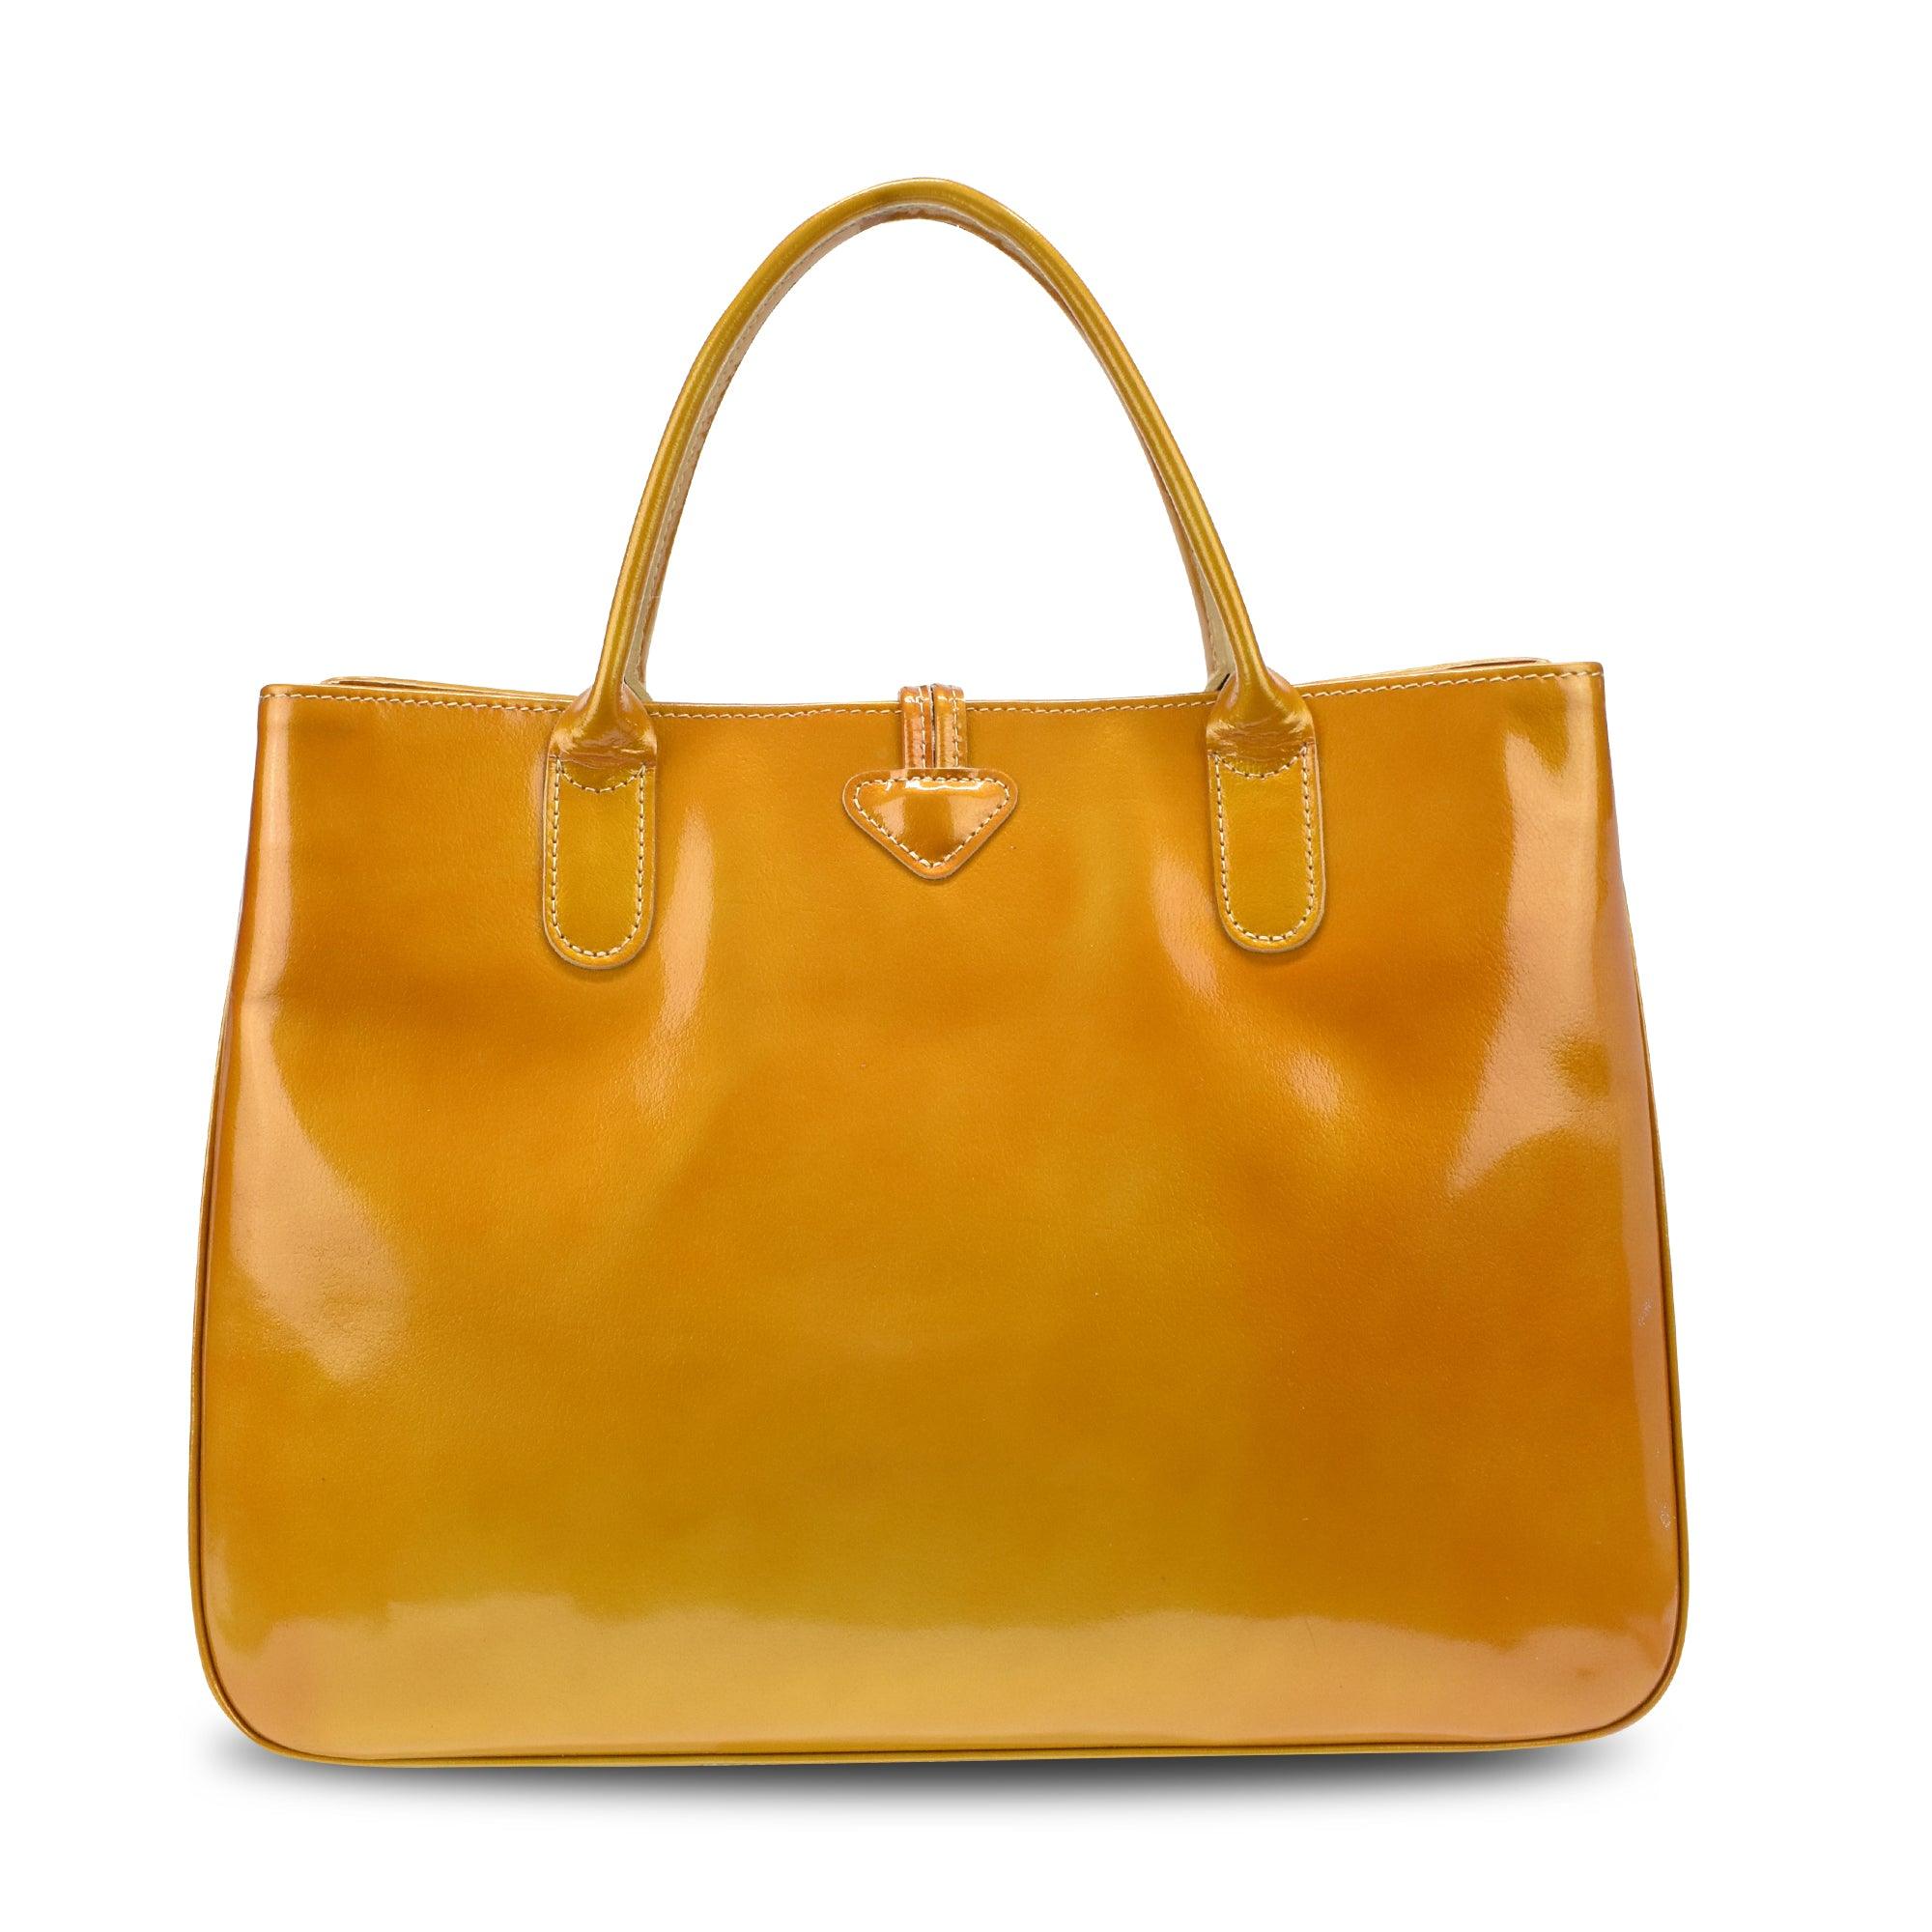 Longchamp Tote Bag - Fashionably Yours